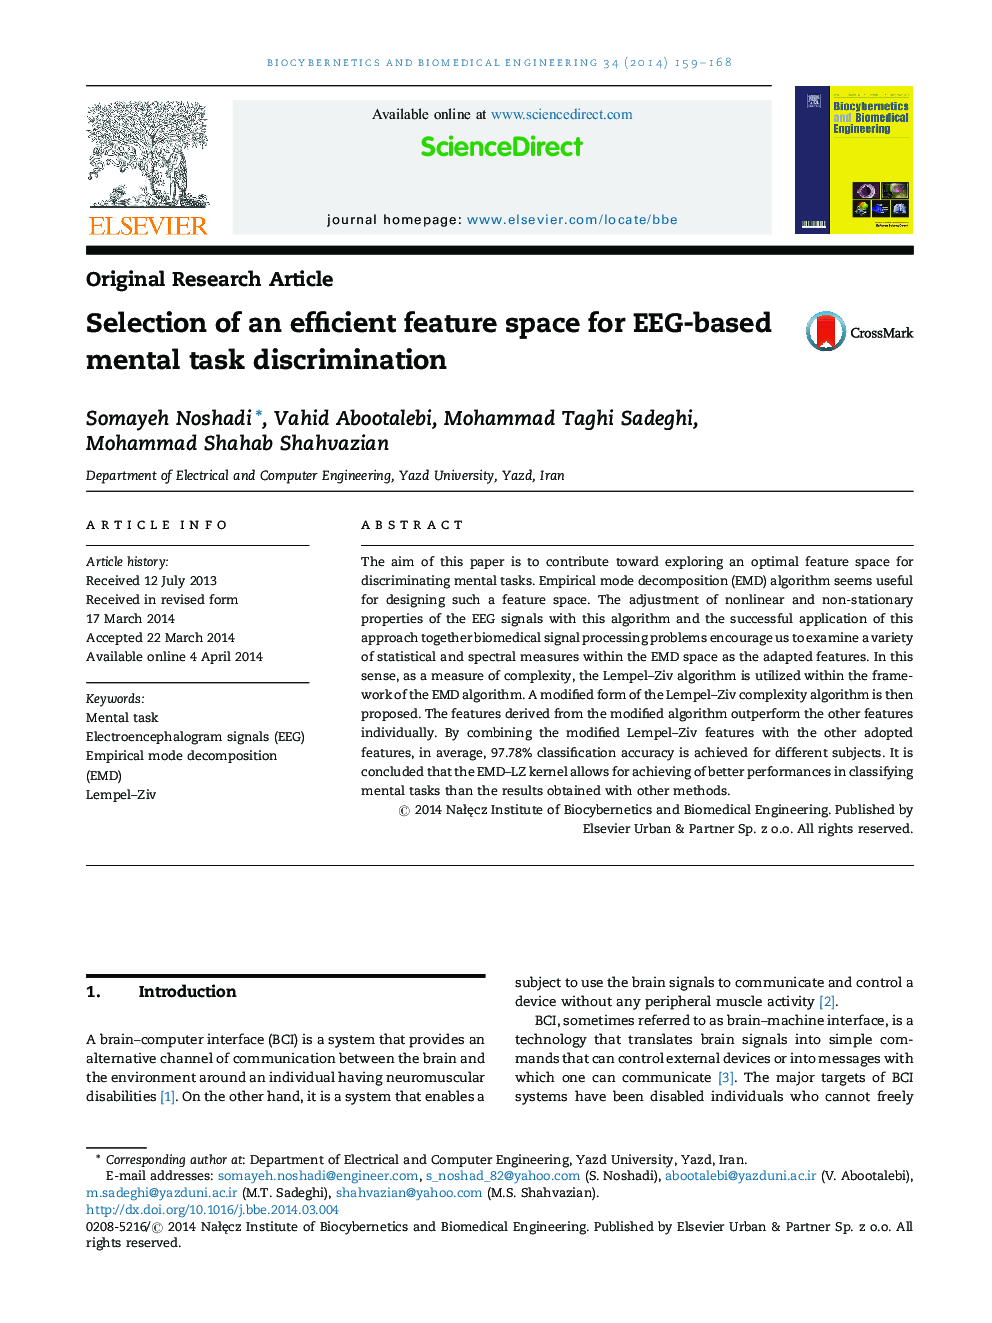 Selection of an efficient feature space for EEG-based mental task discrimination